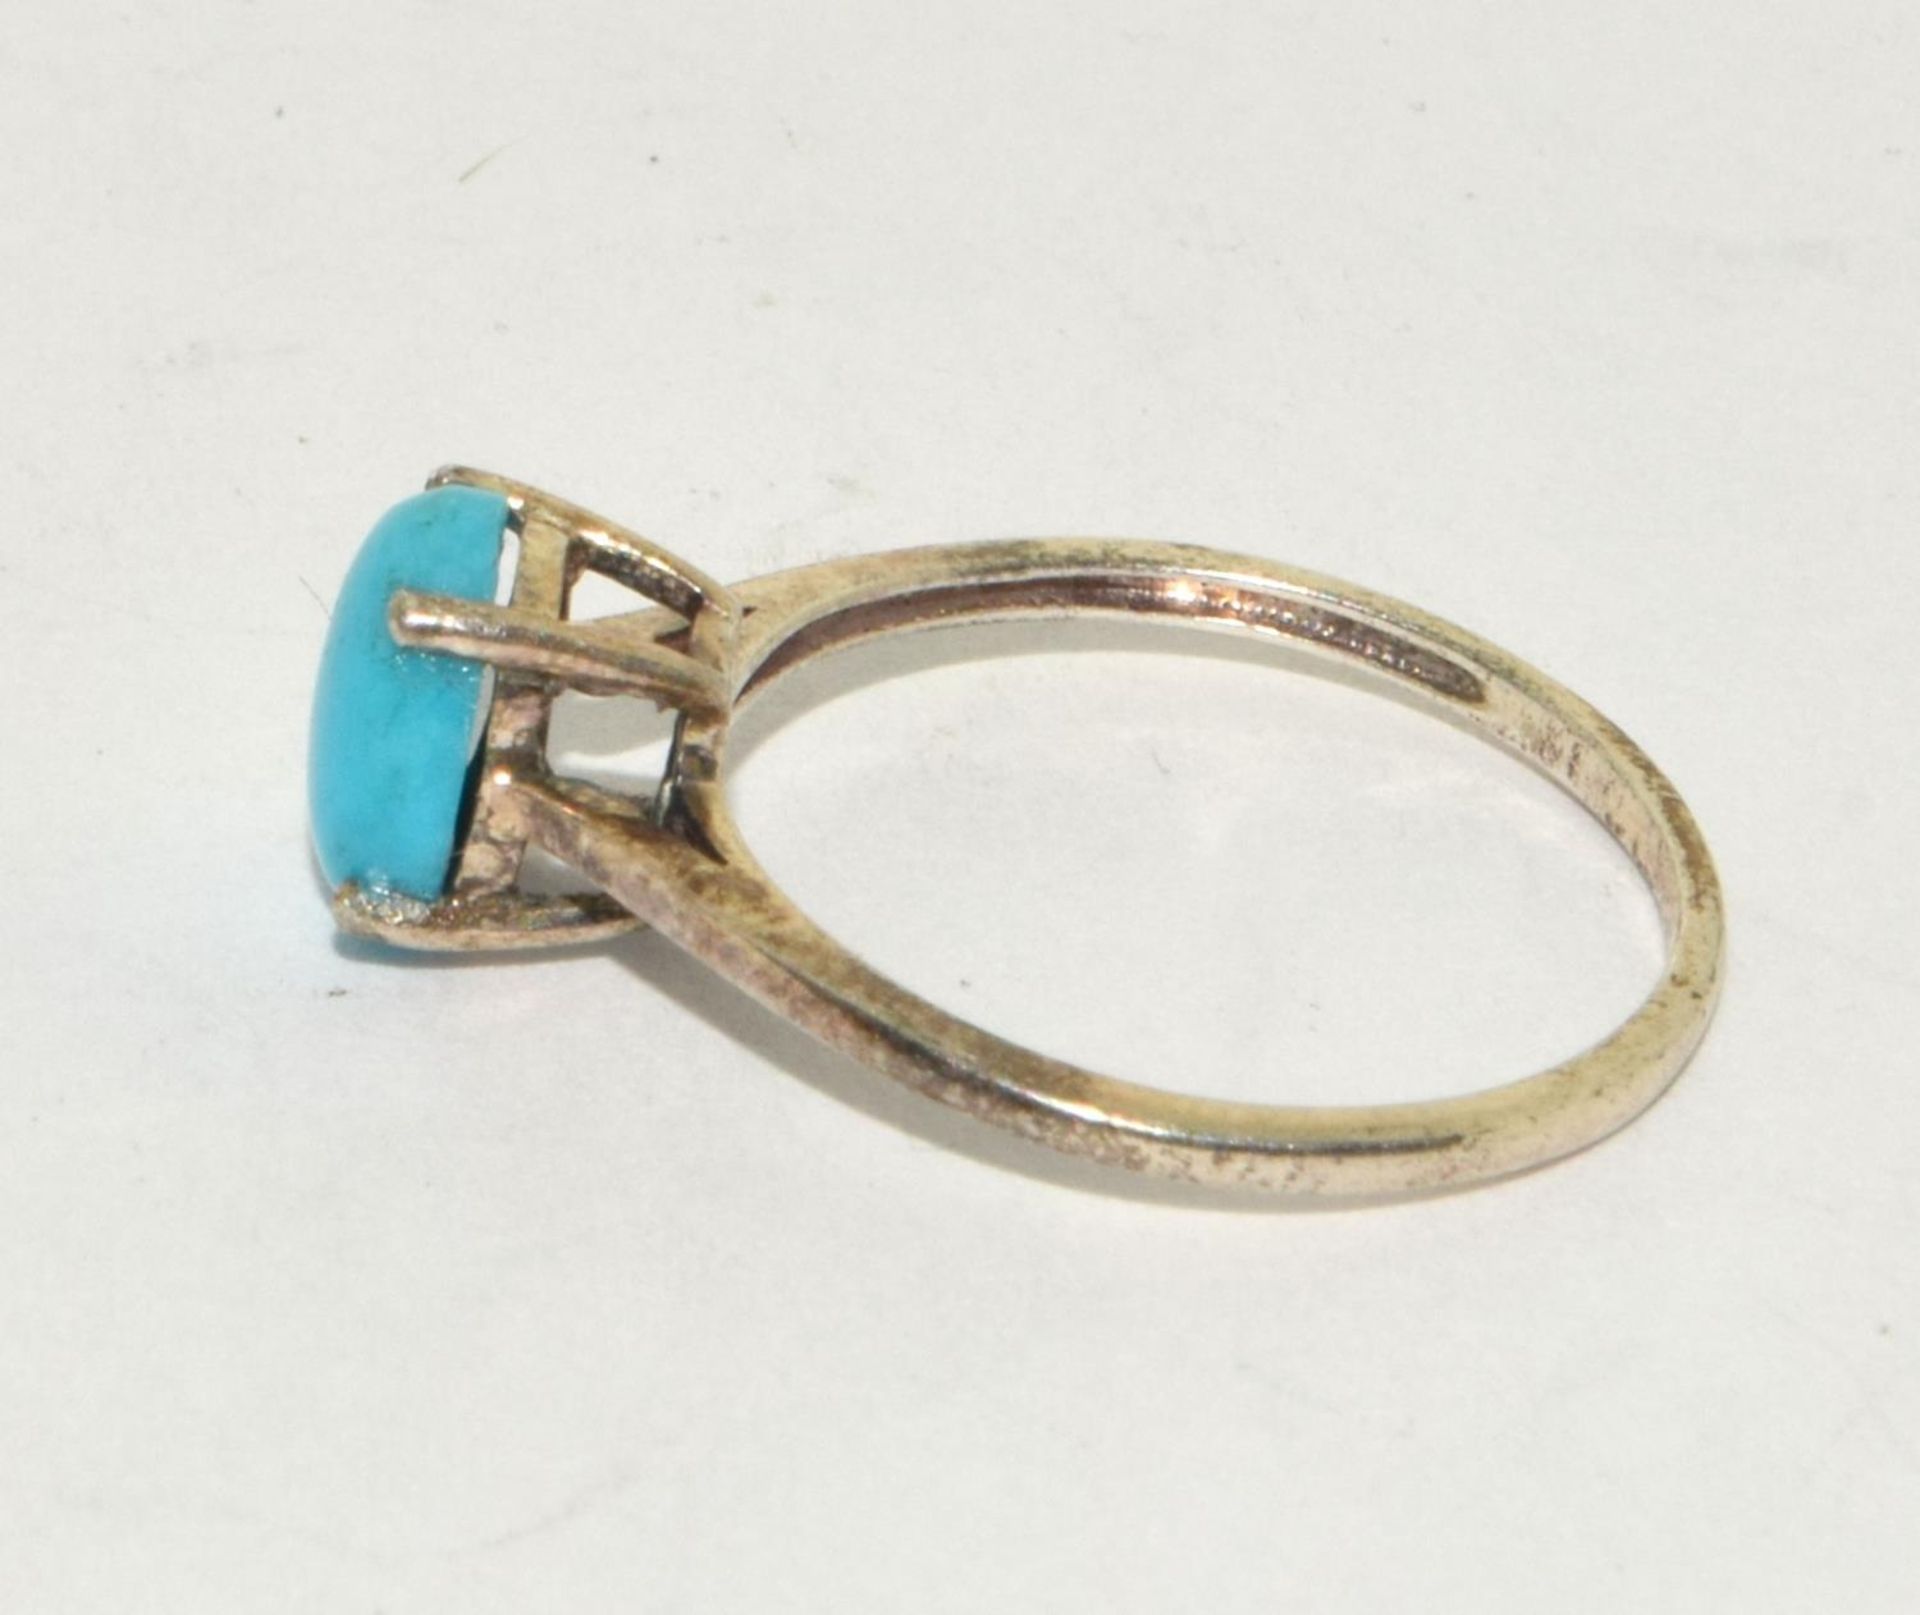 A delicate 925 silver and turquoise solitaire ring Size M 1/2. - Image 2 of 3